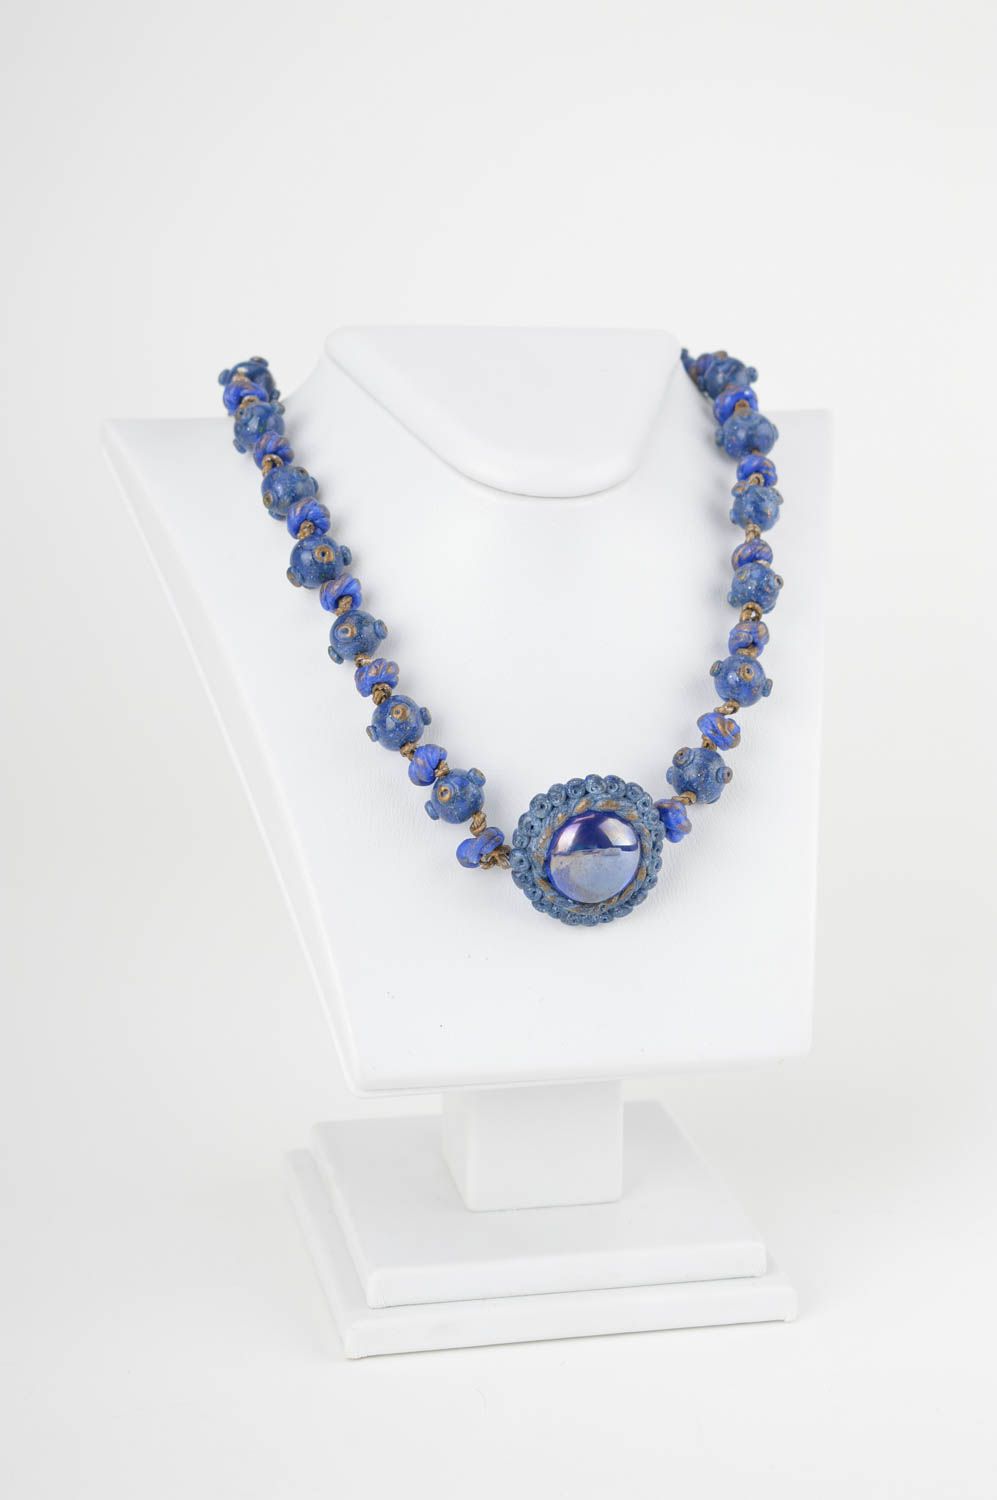 Blue beads jewelry necklace  for women with big blue pendant photo 1